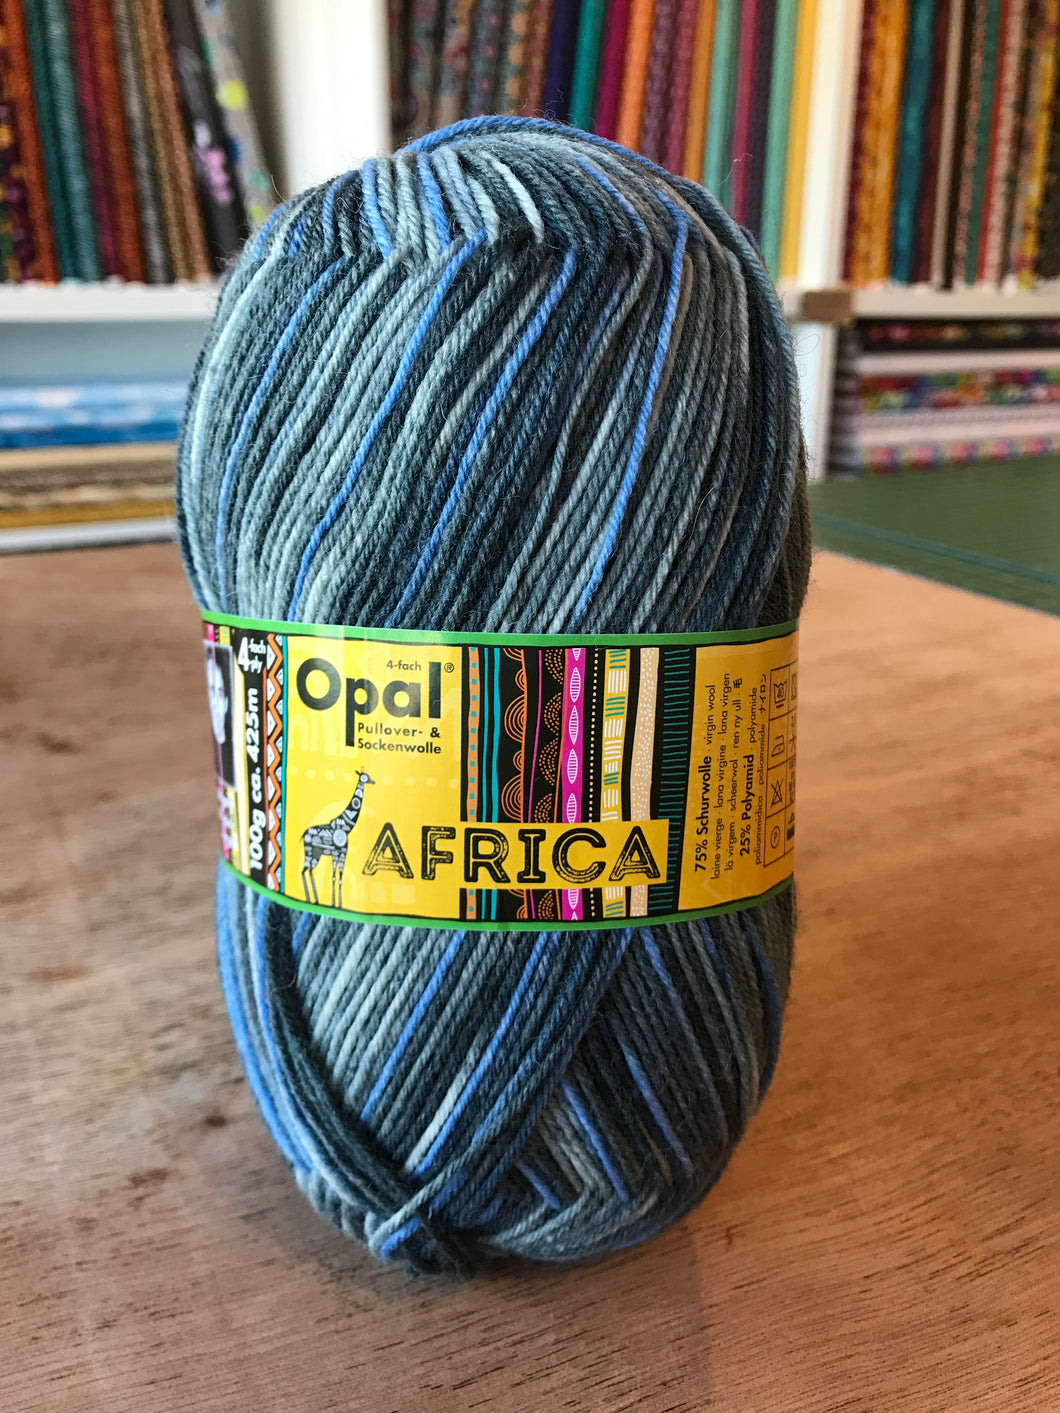 Opal - Africa - 4ply - Shade 11162